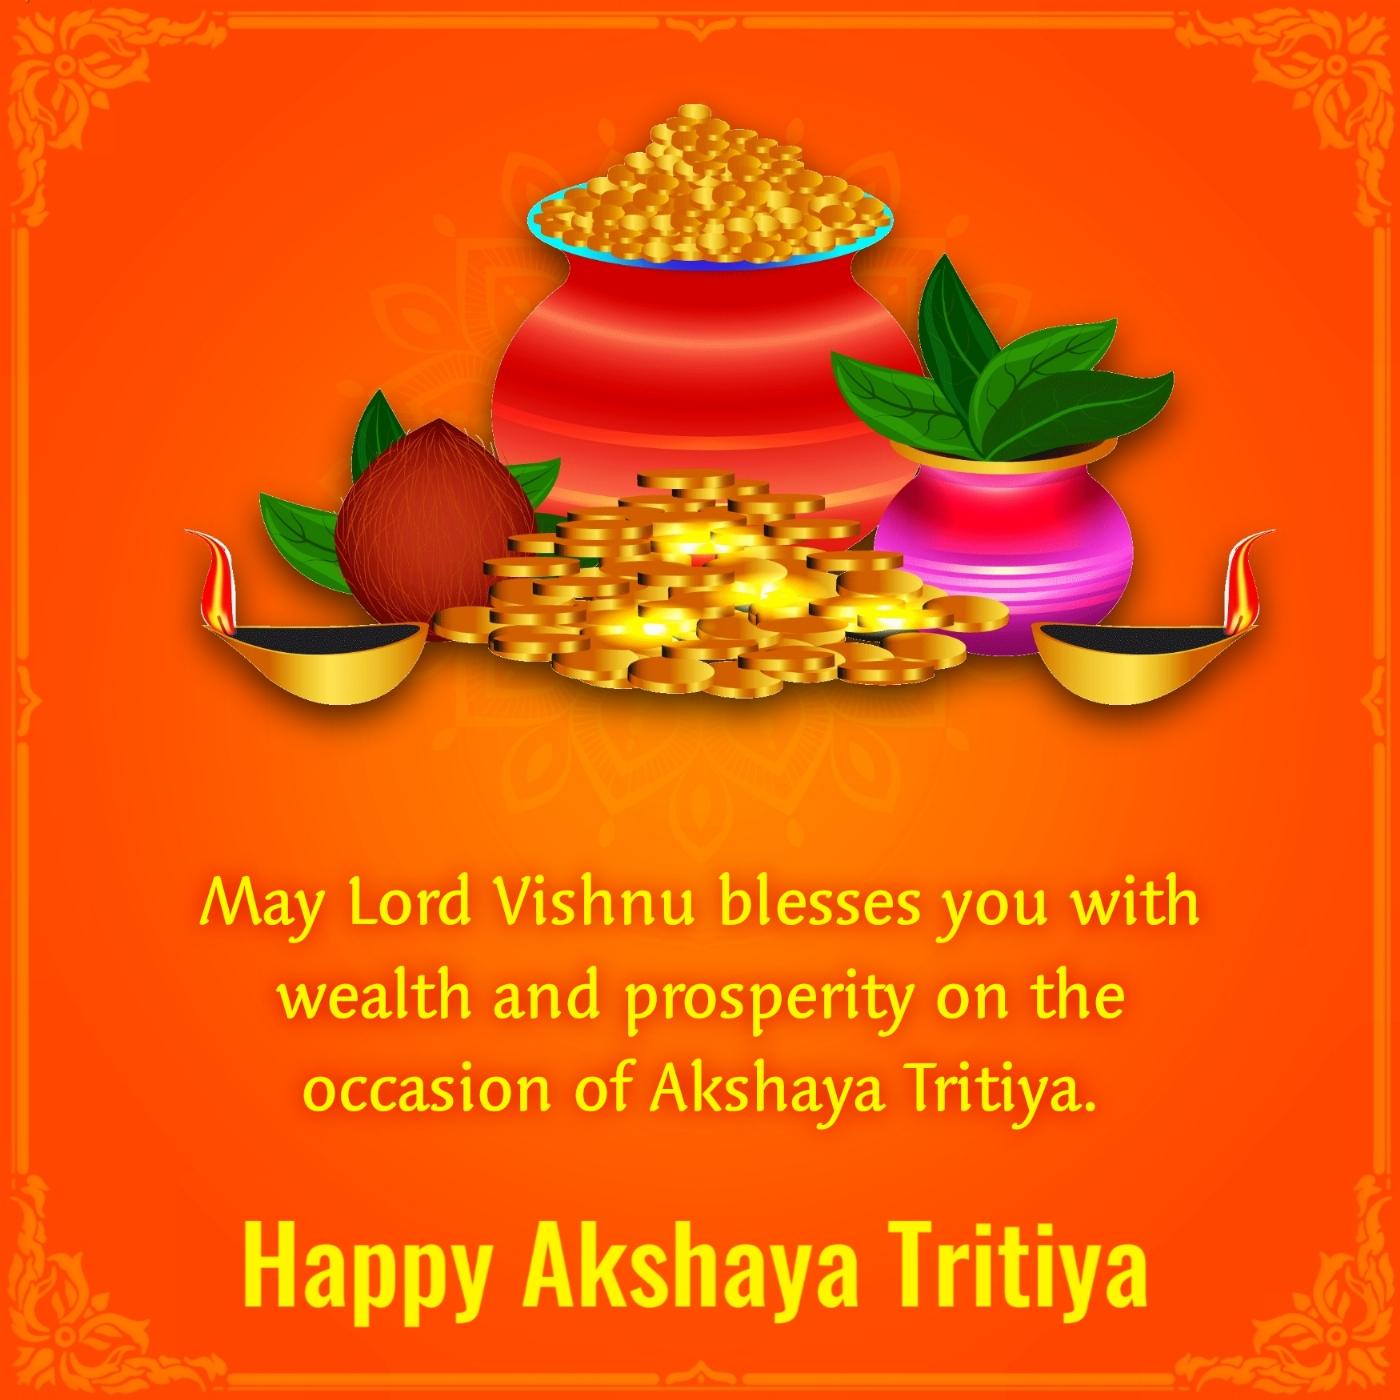 May Lord Vishnu blesses you with wealth and prosperity